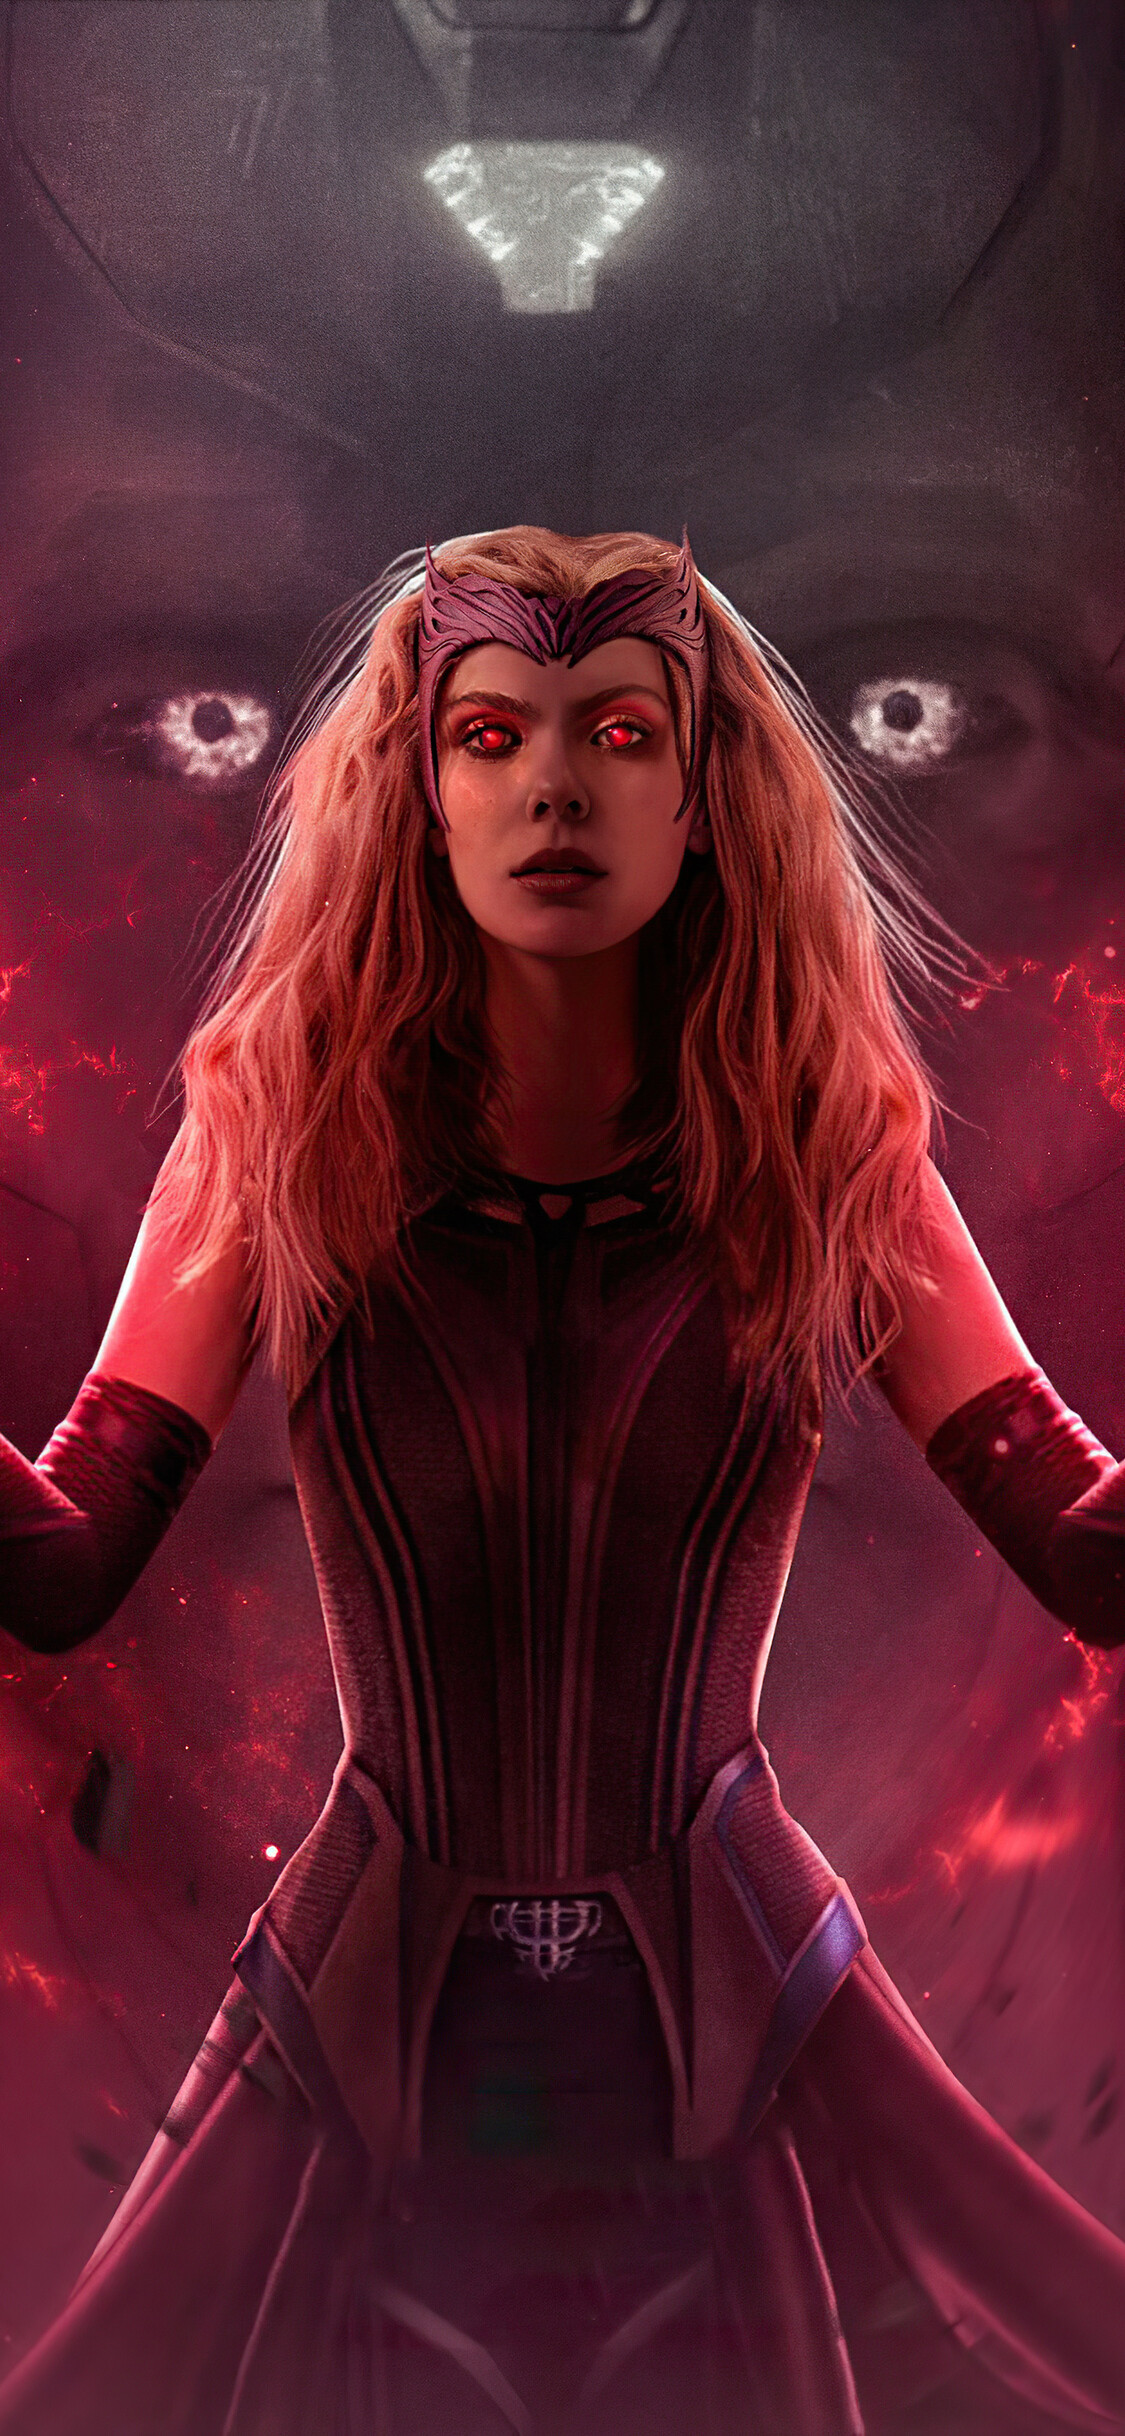 WandaVision: Scarlet Witch, The first series, and beginning, of Phase Four of the MCU. 1130x2440 HD Background.